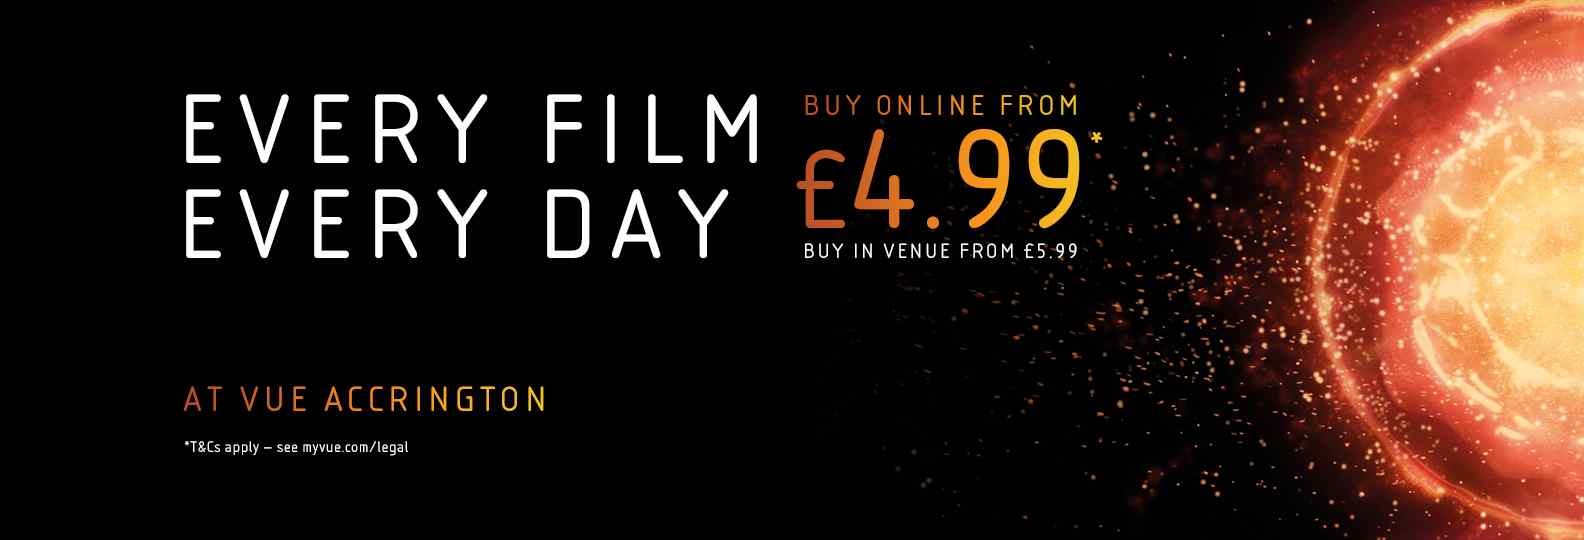 Vue Accrington | Every Film, Every Day from £4.99